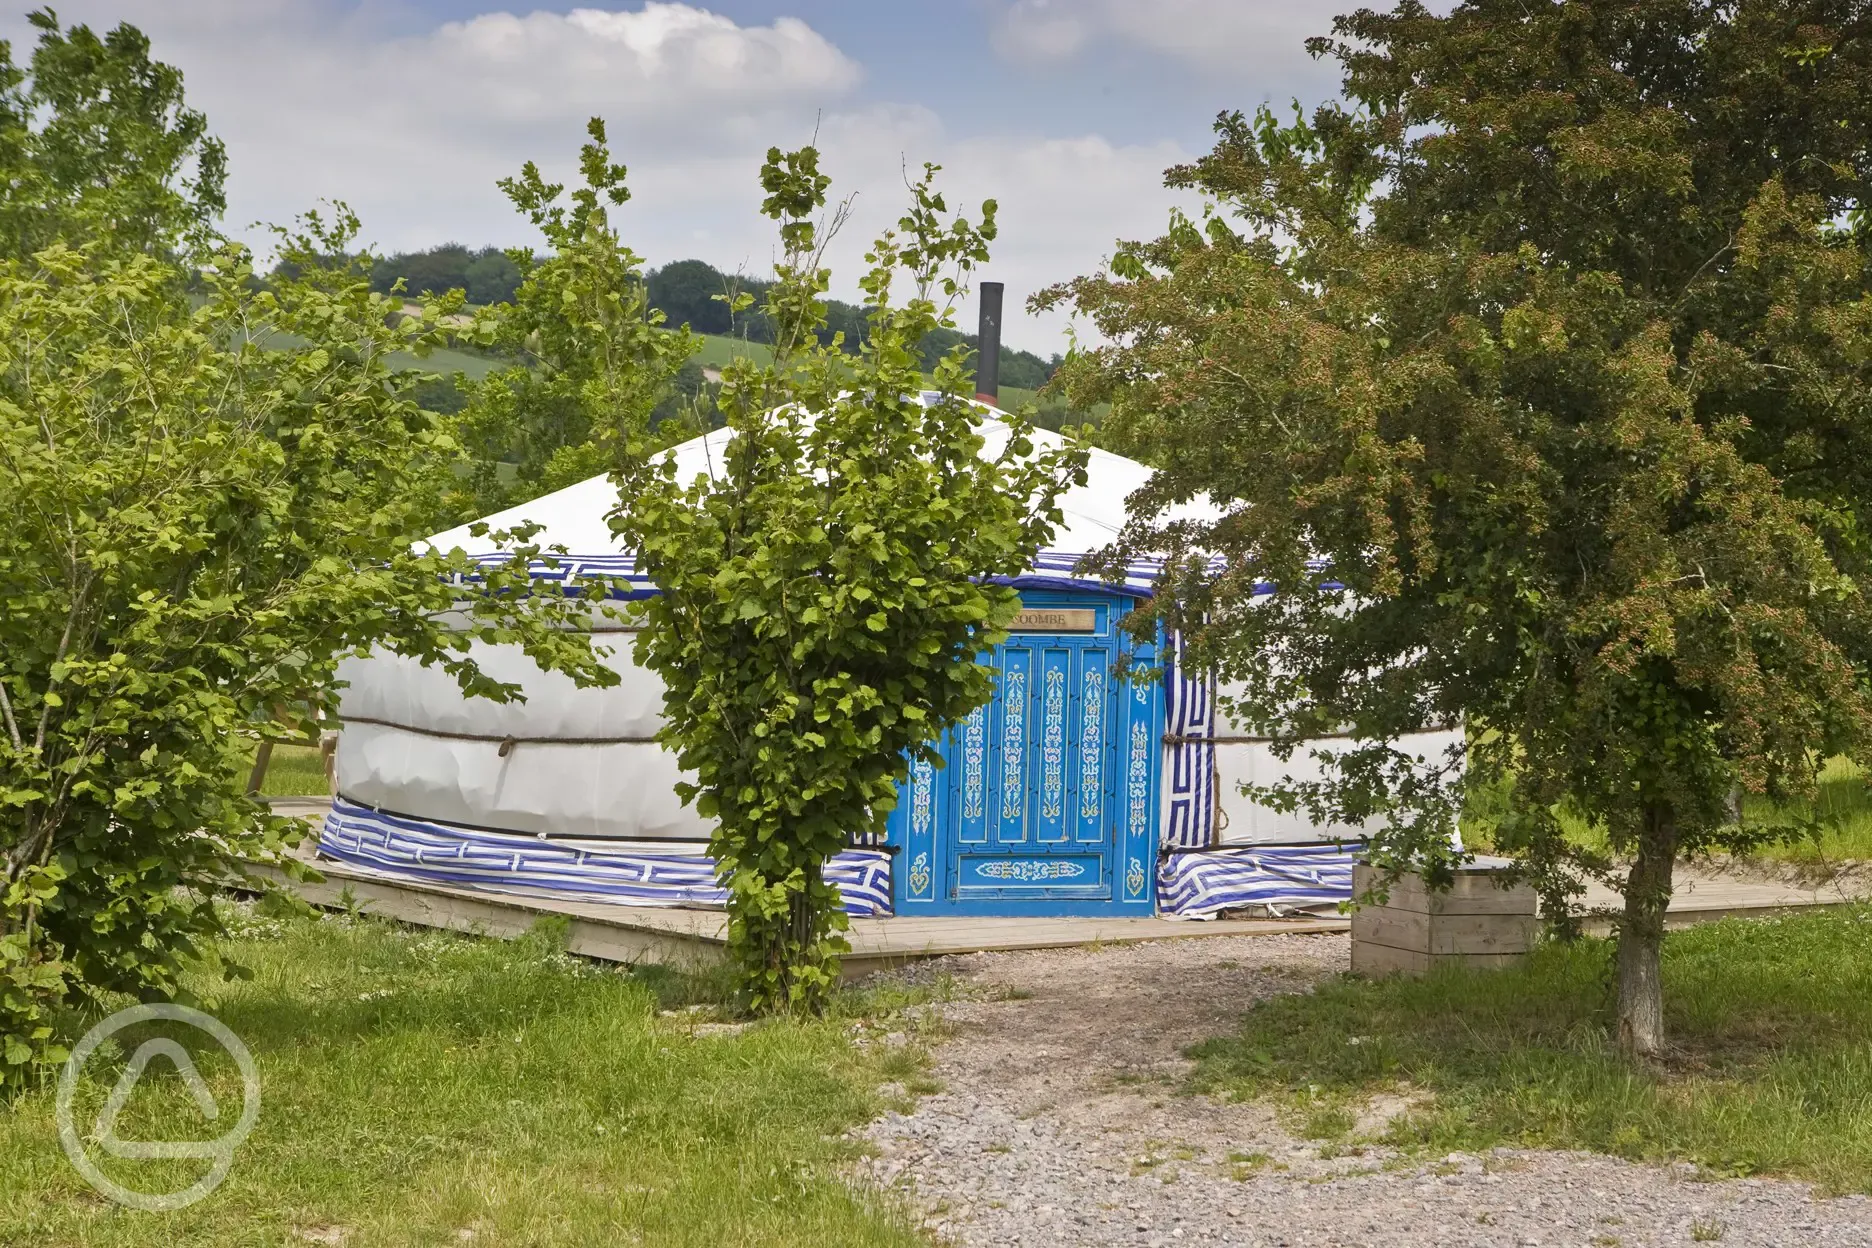 The yurts are great for families and friends